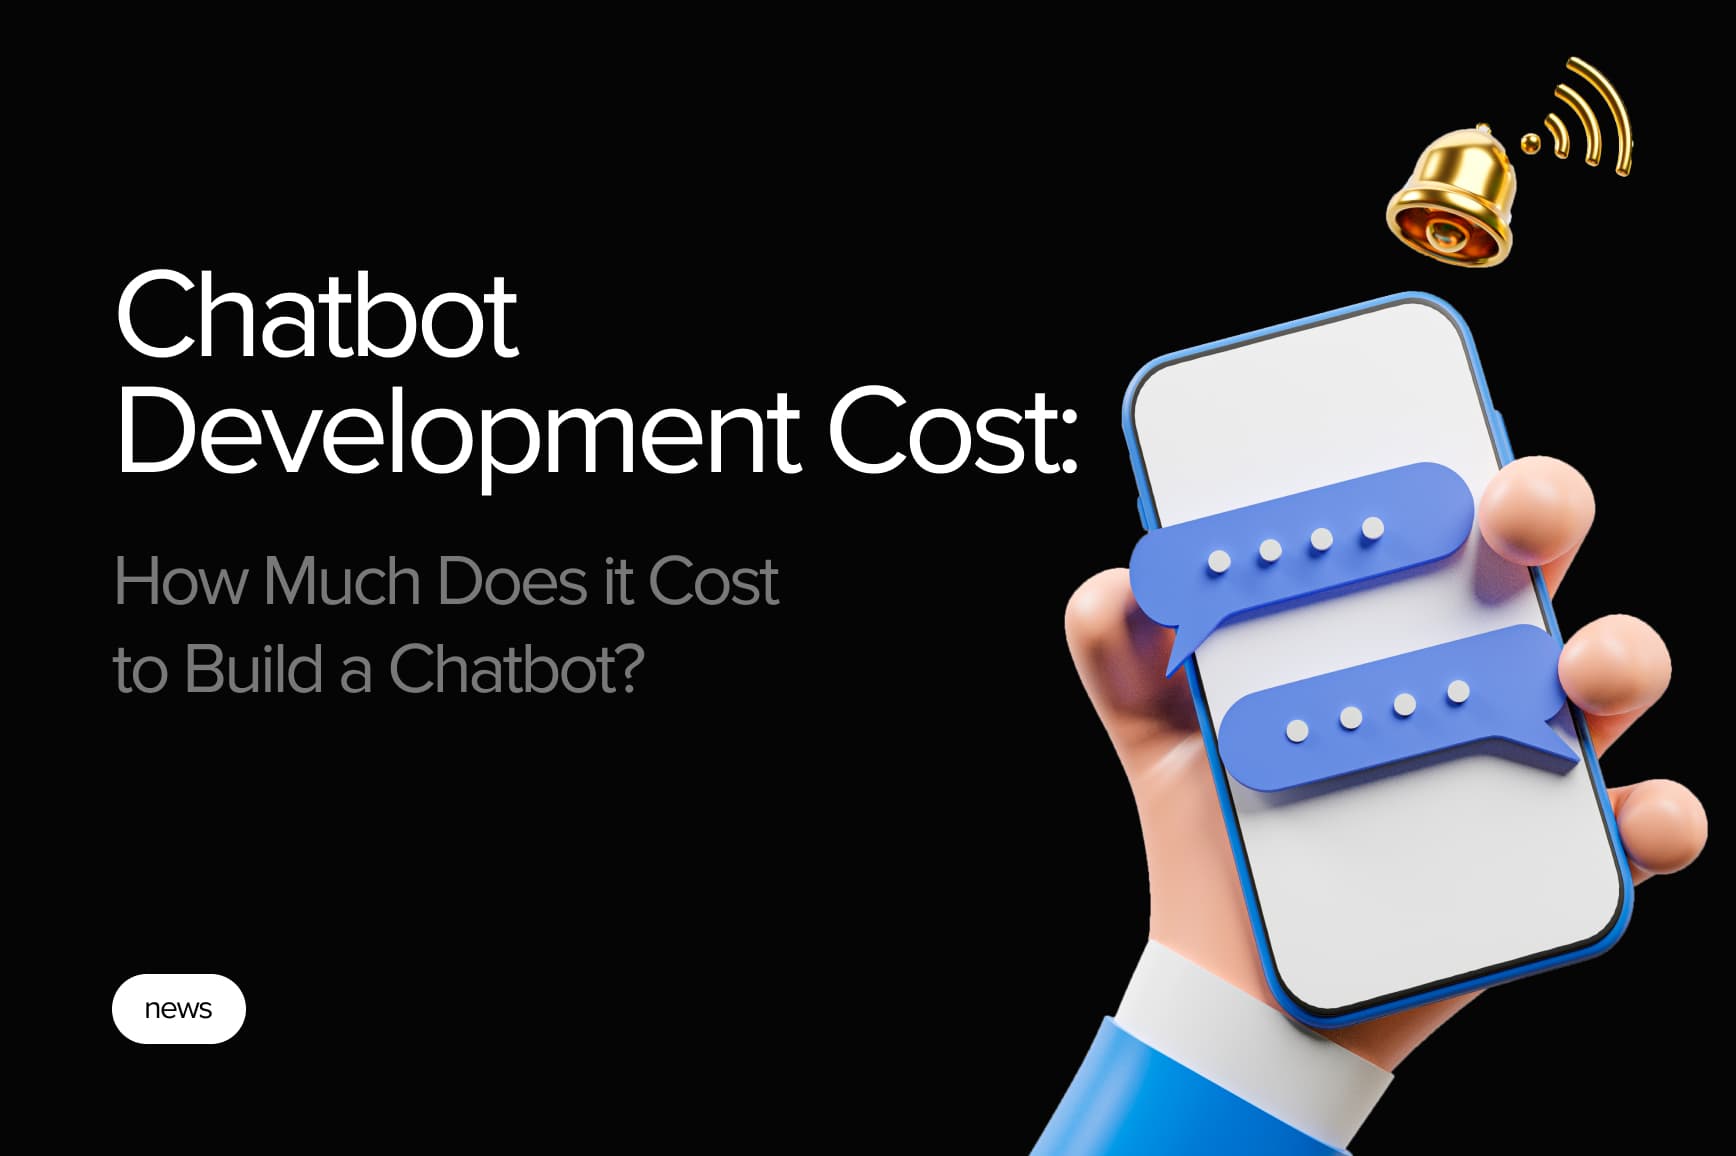 Chatbot Development Cost: How Much Does it Cost to Build a Chatbot?